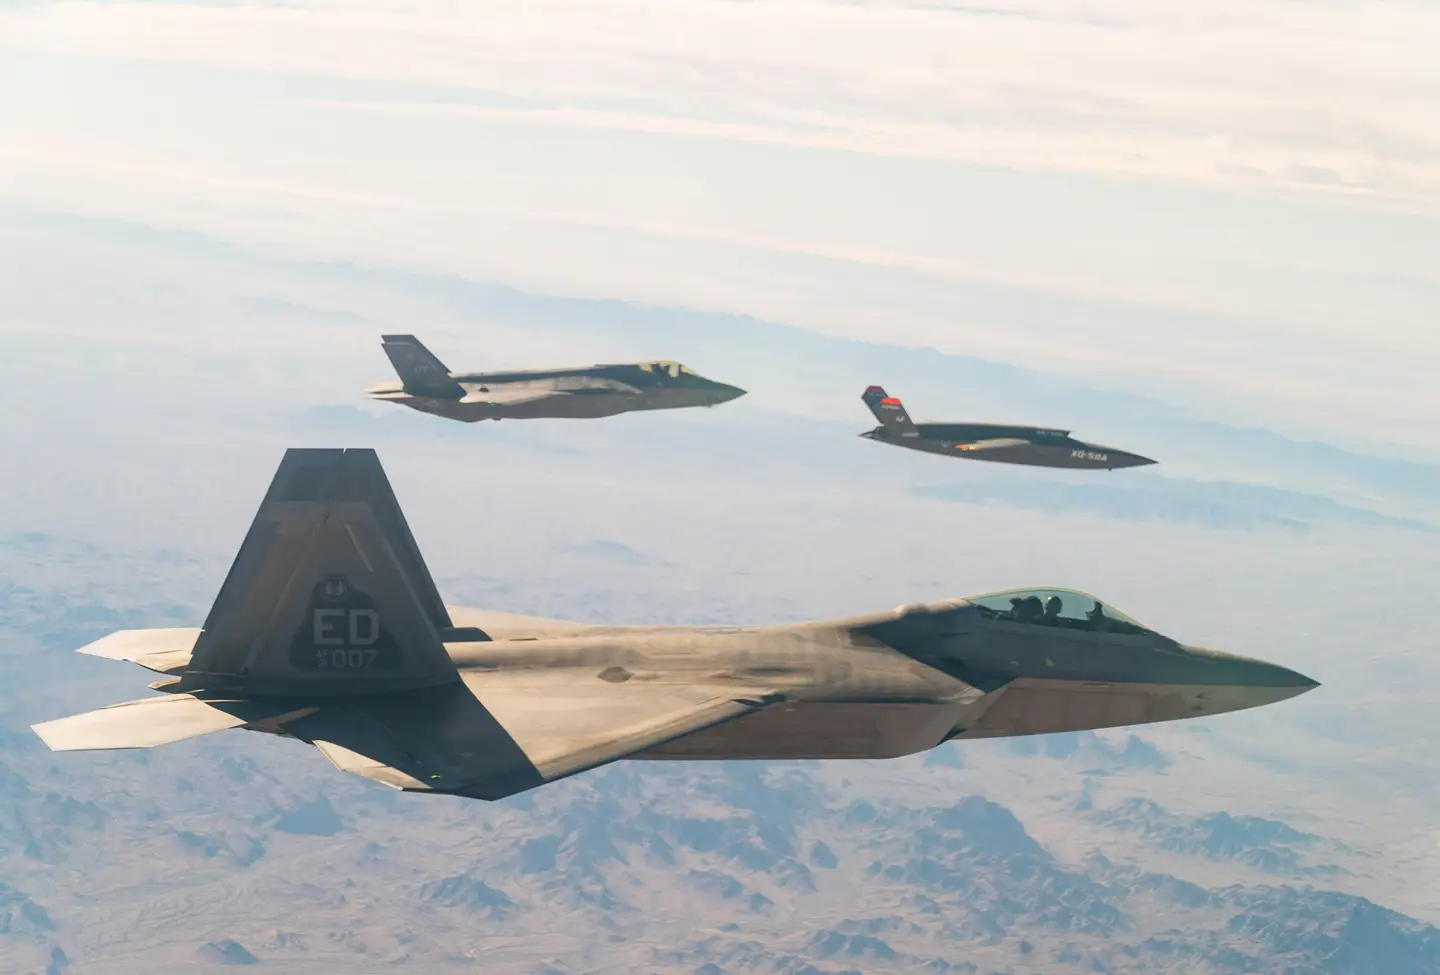 A U.S. Air Force F-22 Raptor and F-35A Lightning II fly in formation with the XQ-58A Valkyrie over the U.S. Army Yuma Proving Ground testing range, Ariz., during a series of tests on Dec. 9, 2020.&nbsp;<em>Credit: U.S. Air Force photo by Tech. Sgt. James Cason</em>